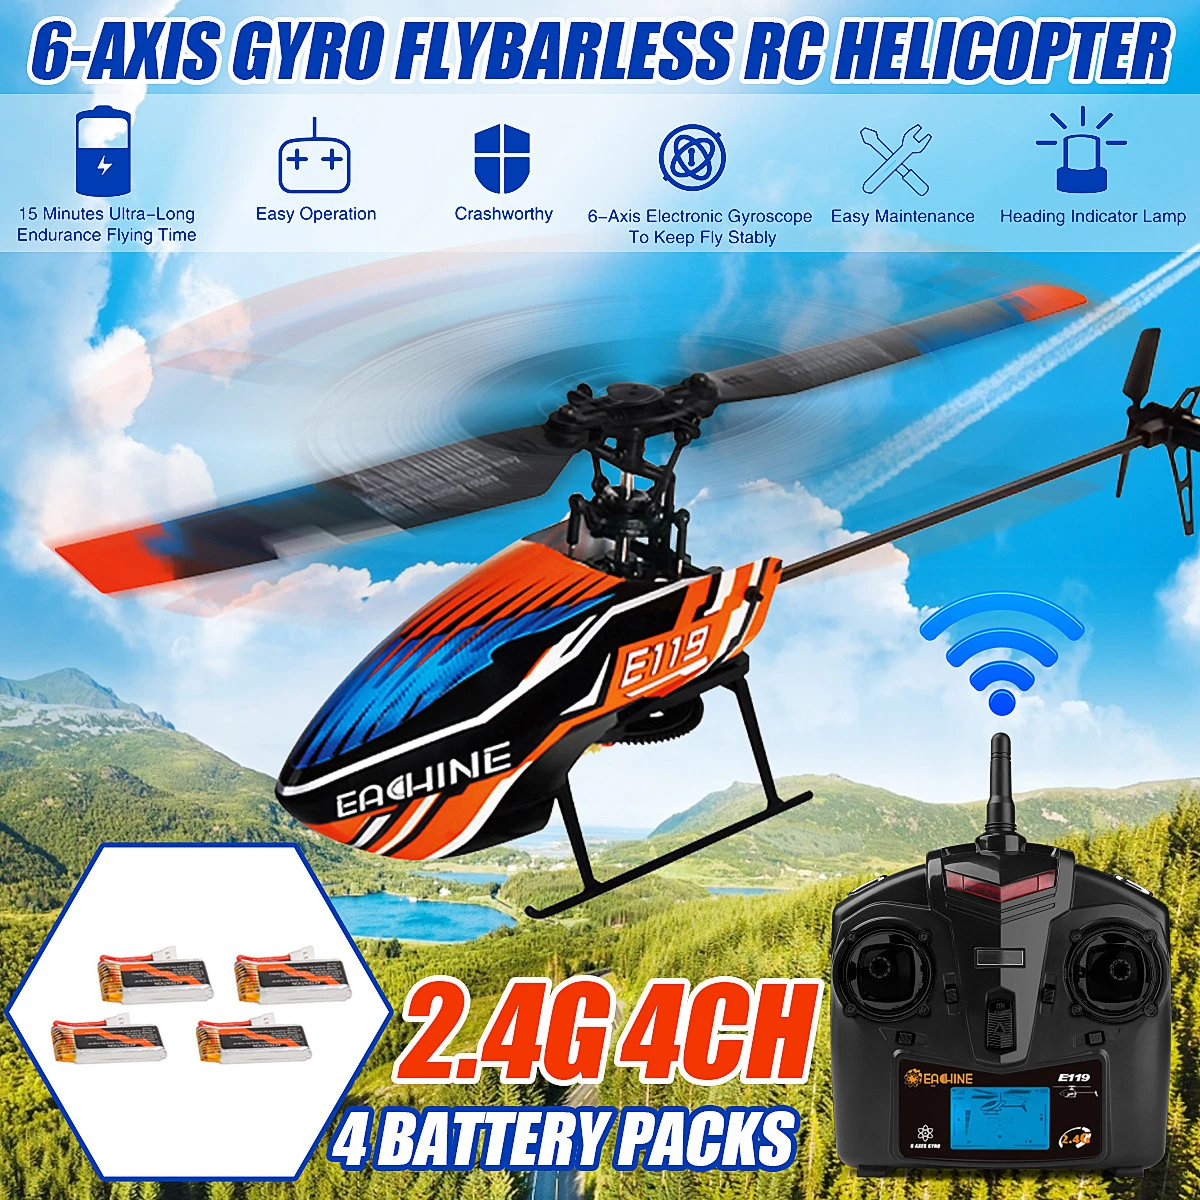 Eachine E119 2.4G 4CH 6-Axis Gyro Flybarless RC Helicopter RTF 3pcs 4pcs Batteries Version